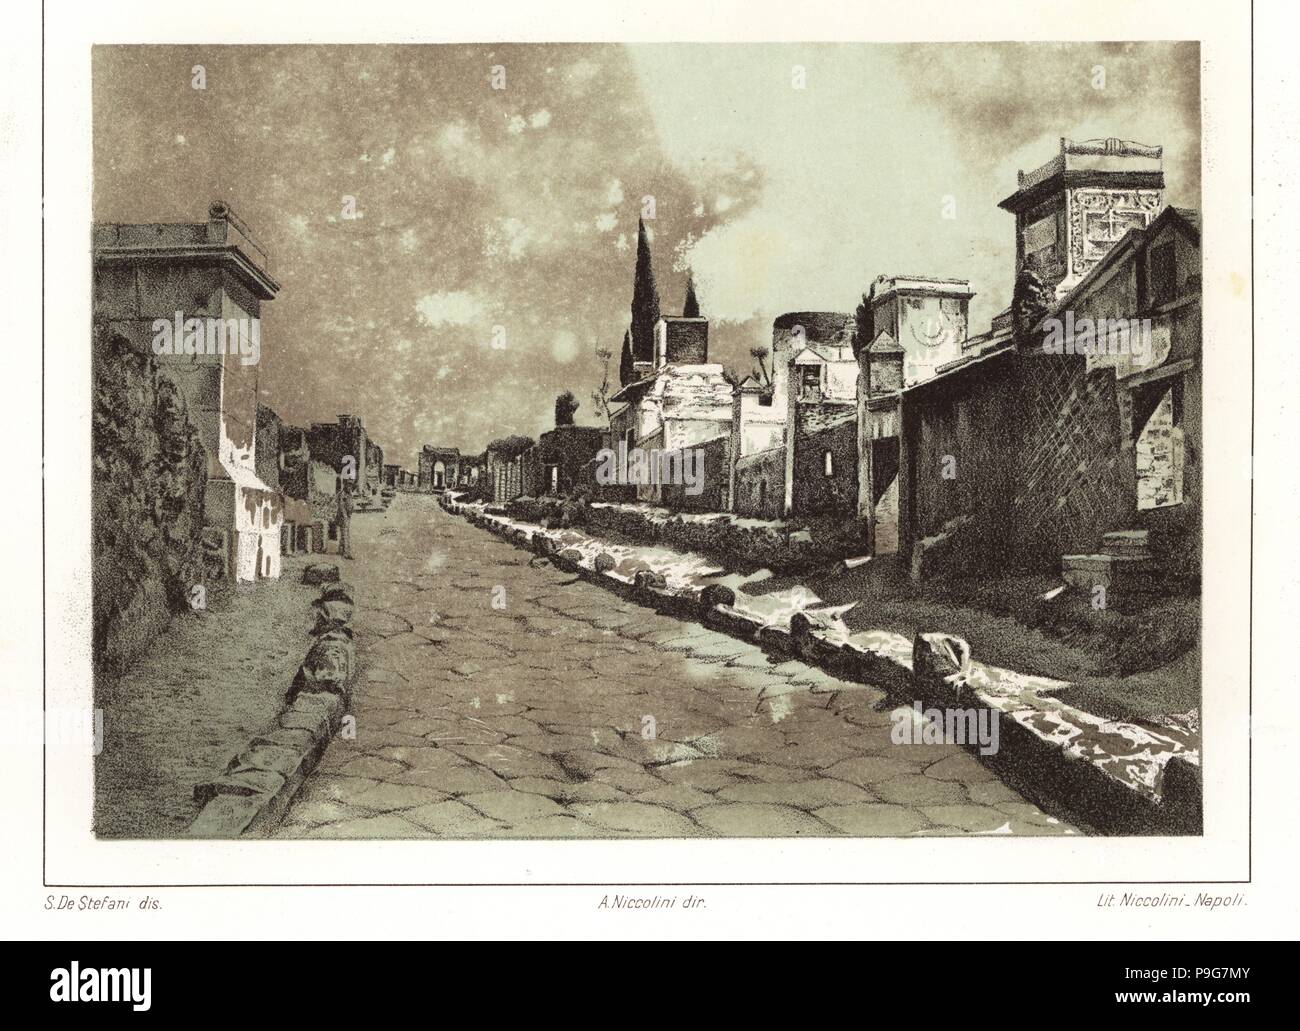 View of the Street of Tombs outside the Herculaneum Gate, Pompeii. Chromolithograph after an illustration by S. De Stefani from Antonio Niccolini’s Pompeii: Views and Restorations (Pompeii: Essaies et Restaurations), published by Niccolini, Naples, 1898. Antonio was grandson of the architect Antonio Niccolini Sr. Stock Photo